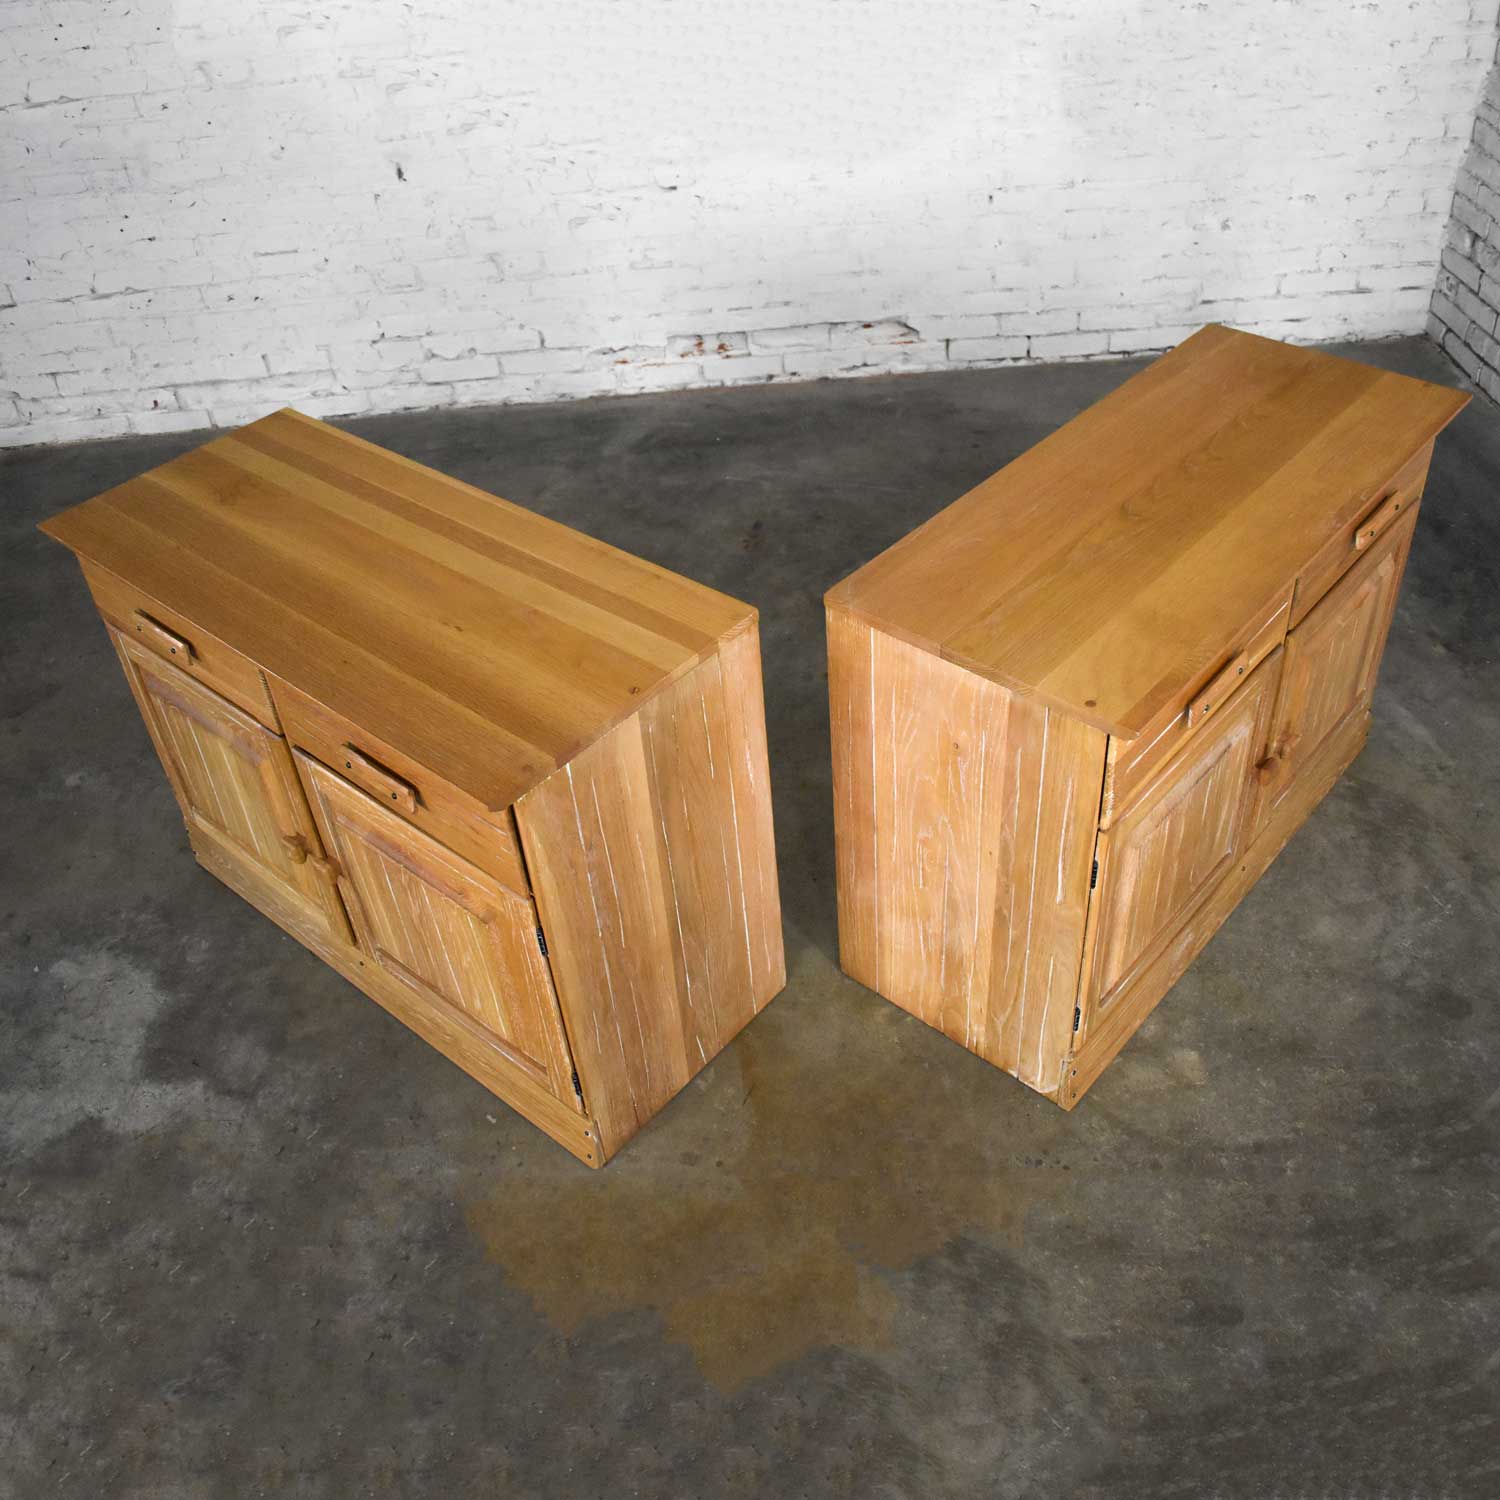 Vintage Ranch Oak Pair of Small Credenzas or Buffet Cabinets by A. Brandt Company